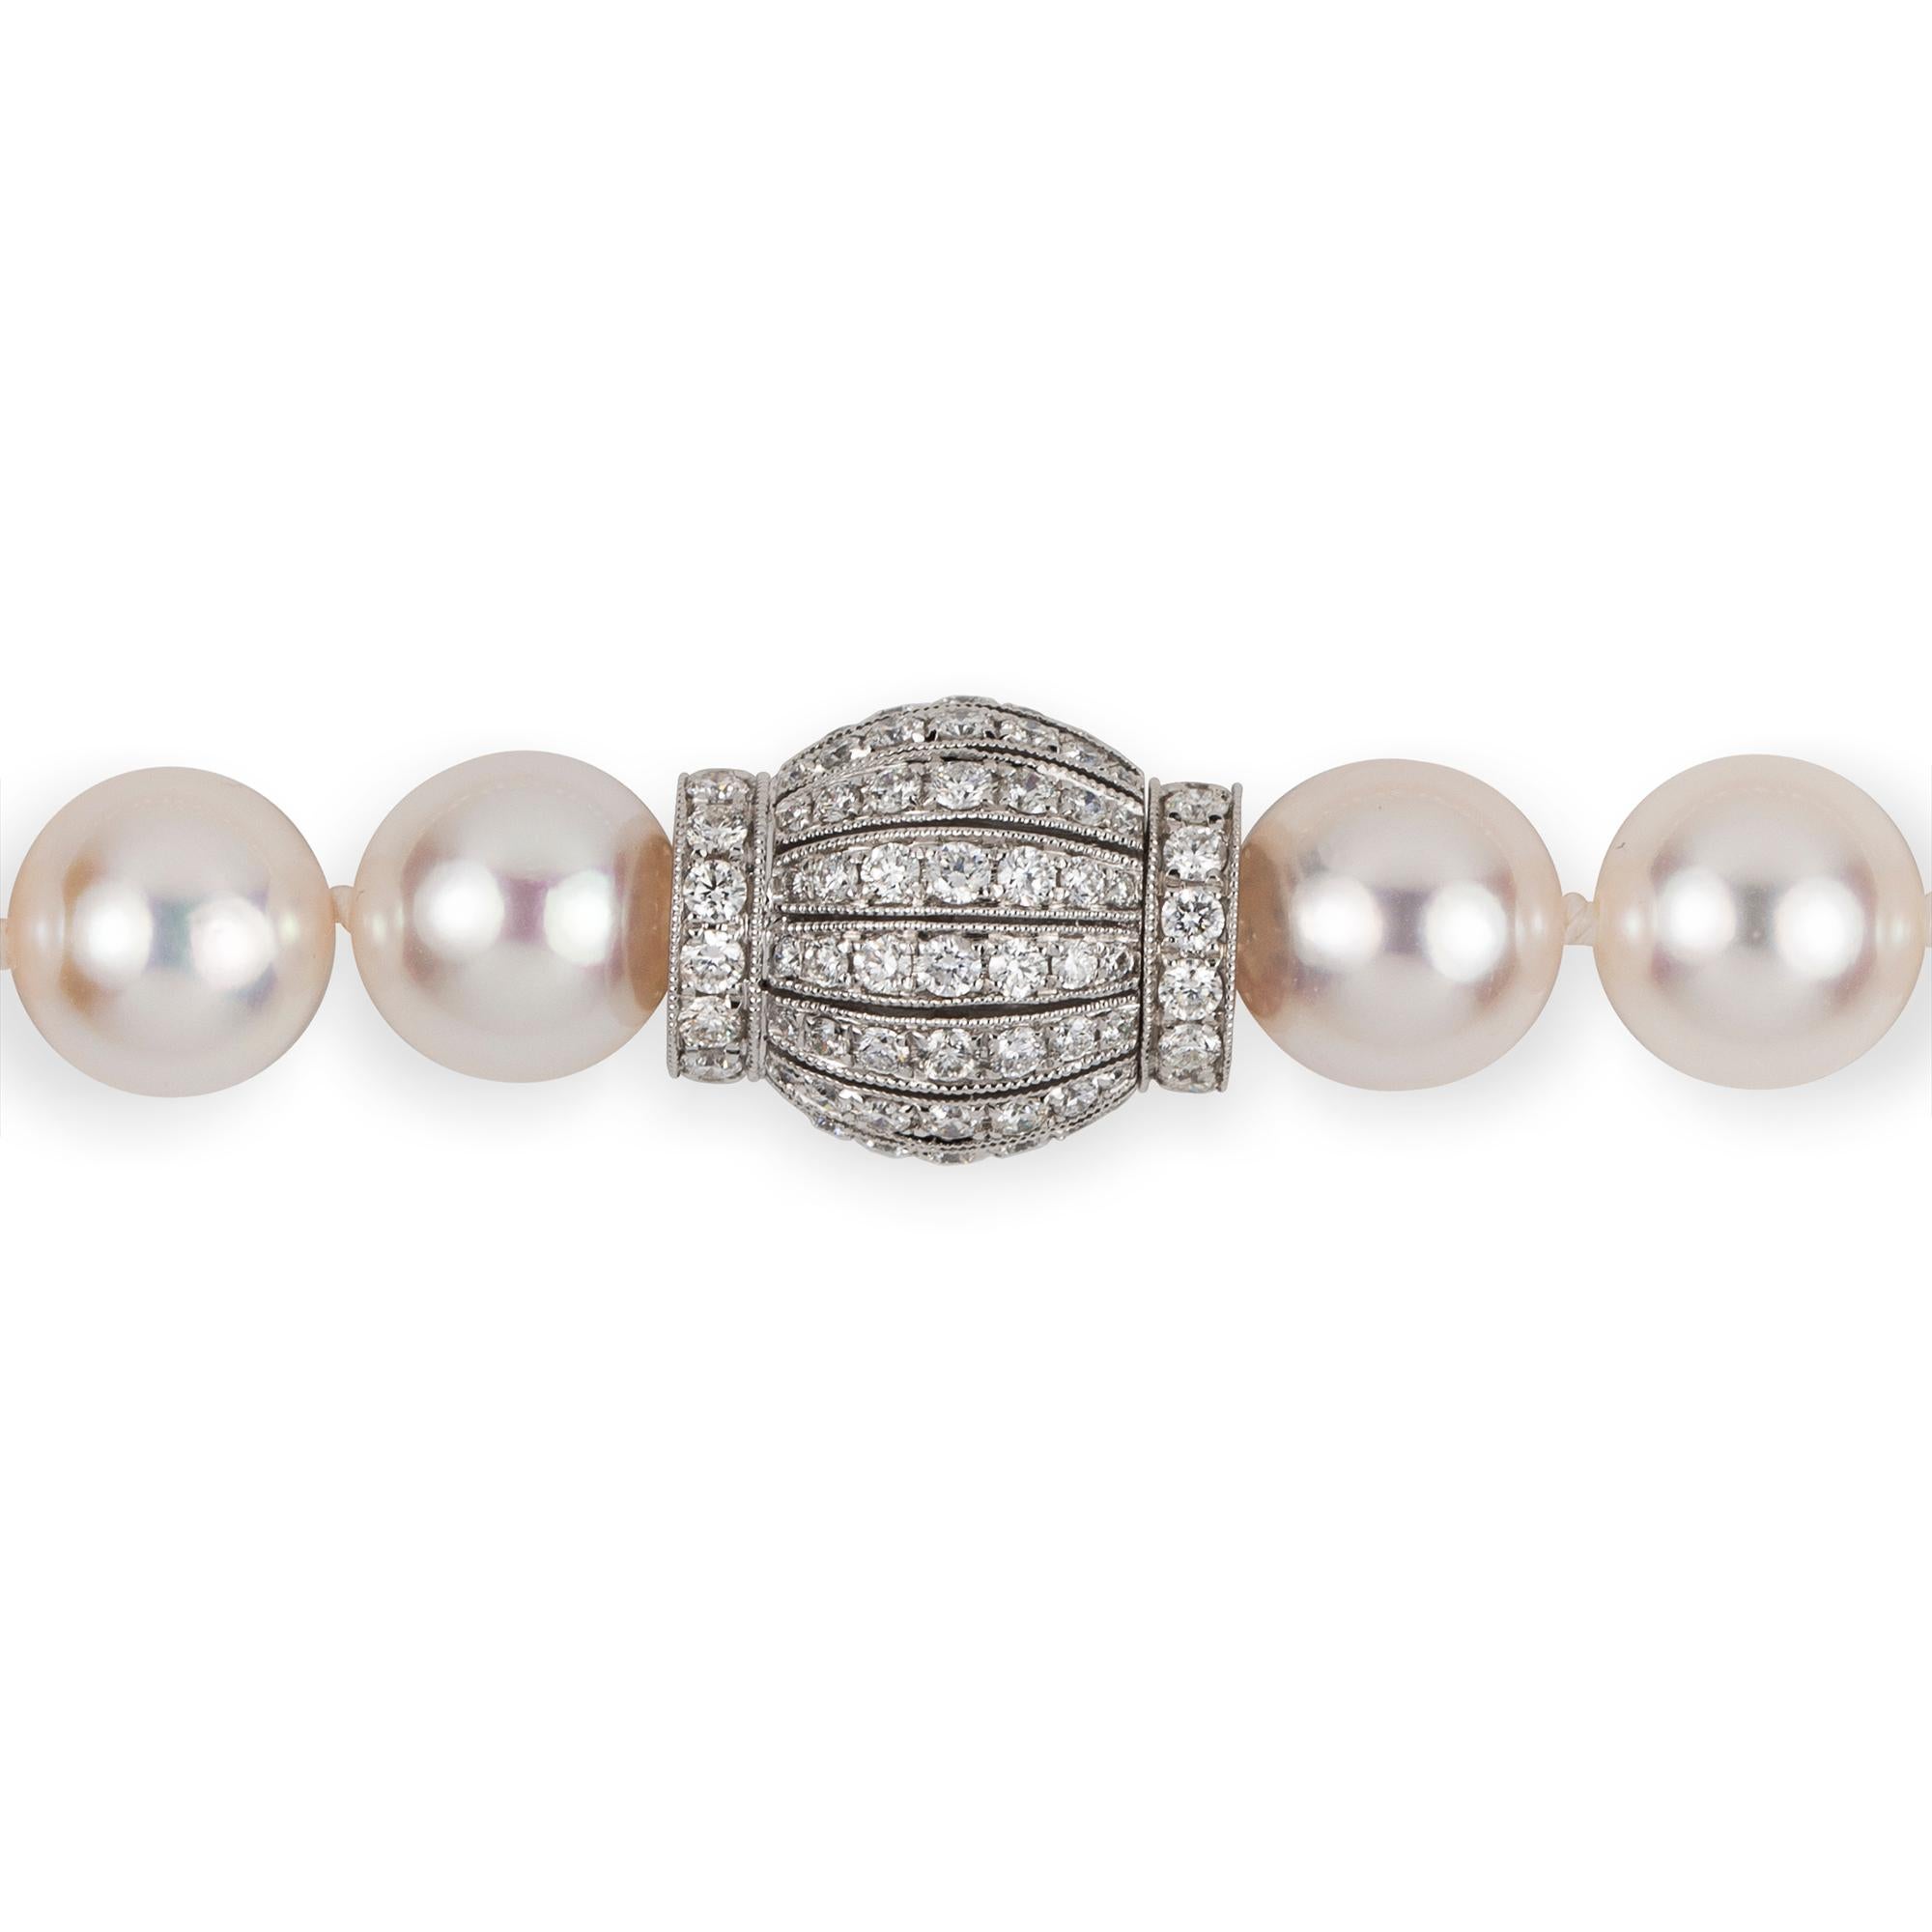 A single Akoya Pearl Necklace With Diamond Clasp, the forty-four fine cultured Akoya pearls measuring approximately 9-9.5mm in diameter, strung and knotted, attached from a diamond-set clasp of barrel-shape design, set with round brilliant-cut